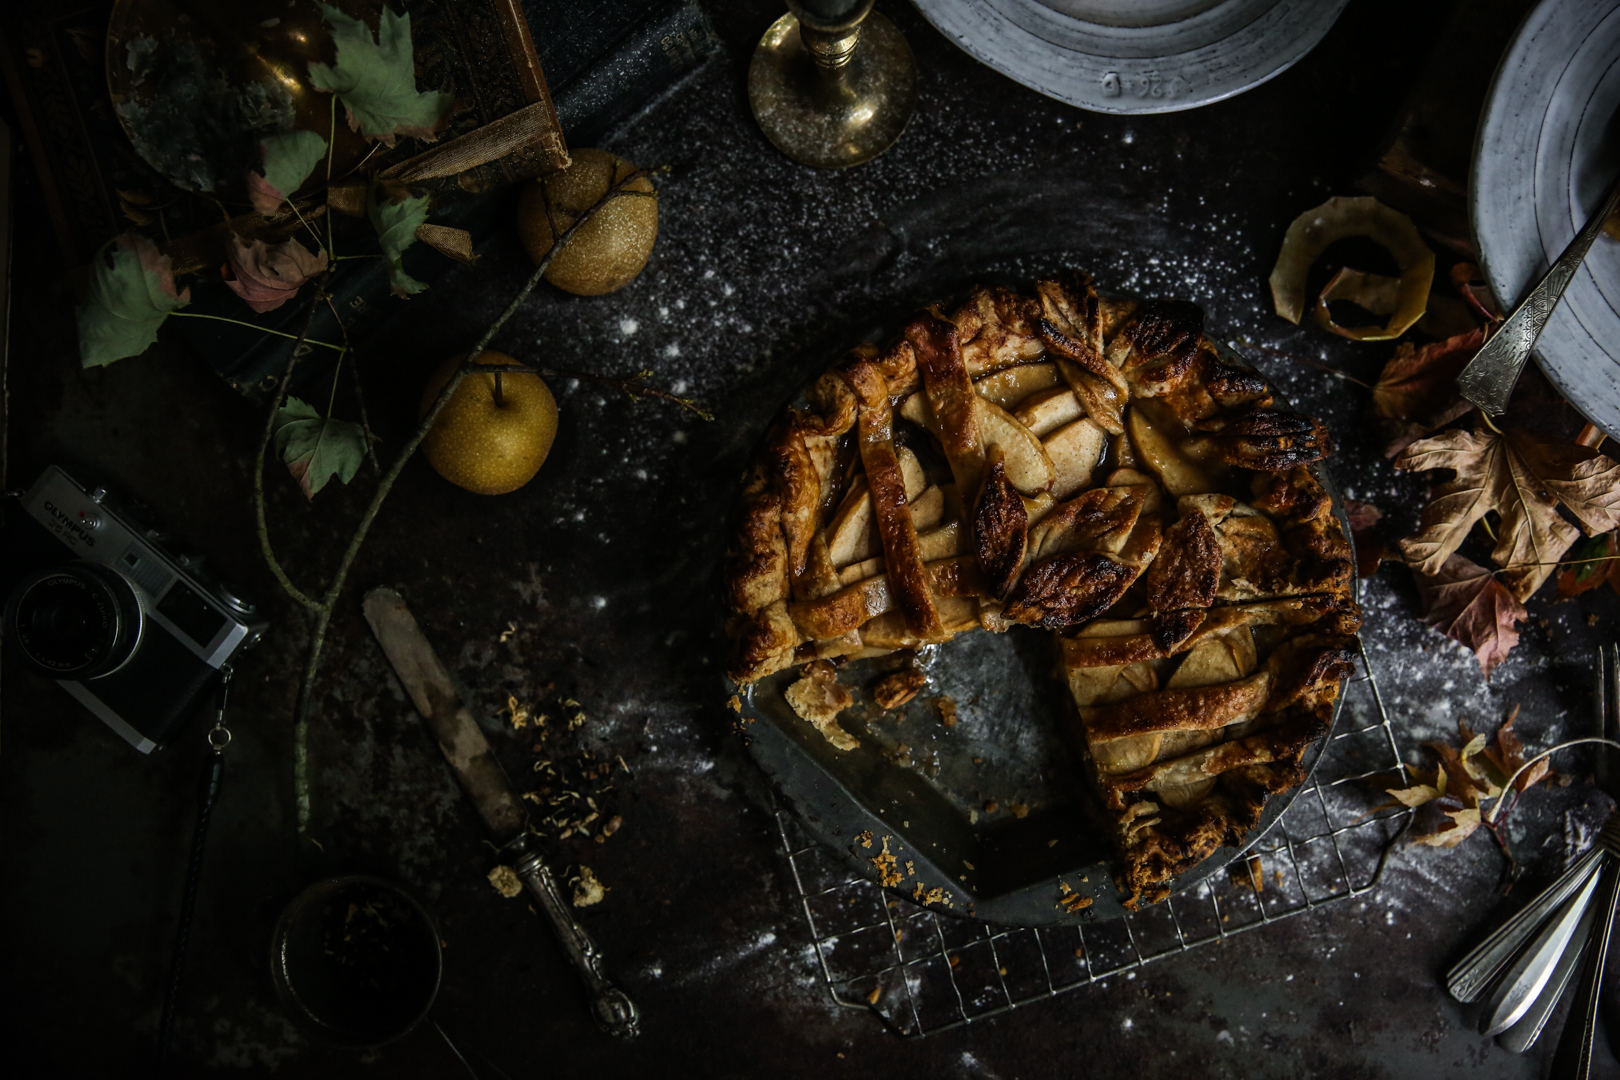 apple-bourbon-pie-photography-recipe-and-styling-by-christiann-koepke-of-christiannkoepke-com-17